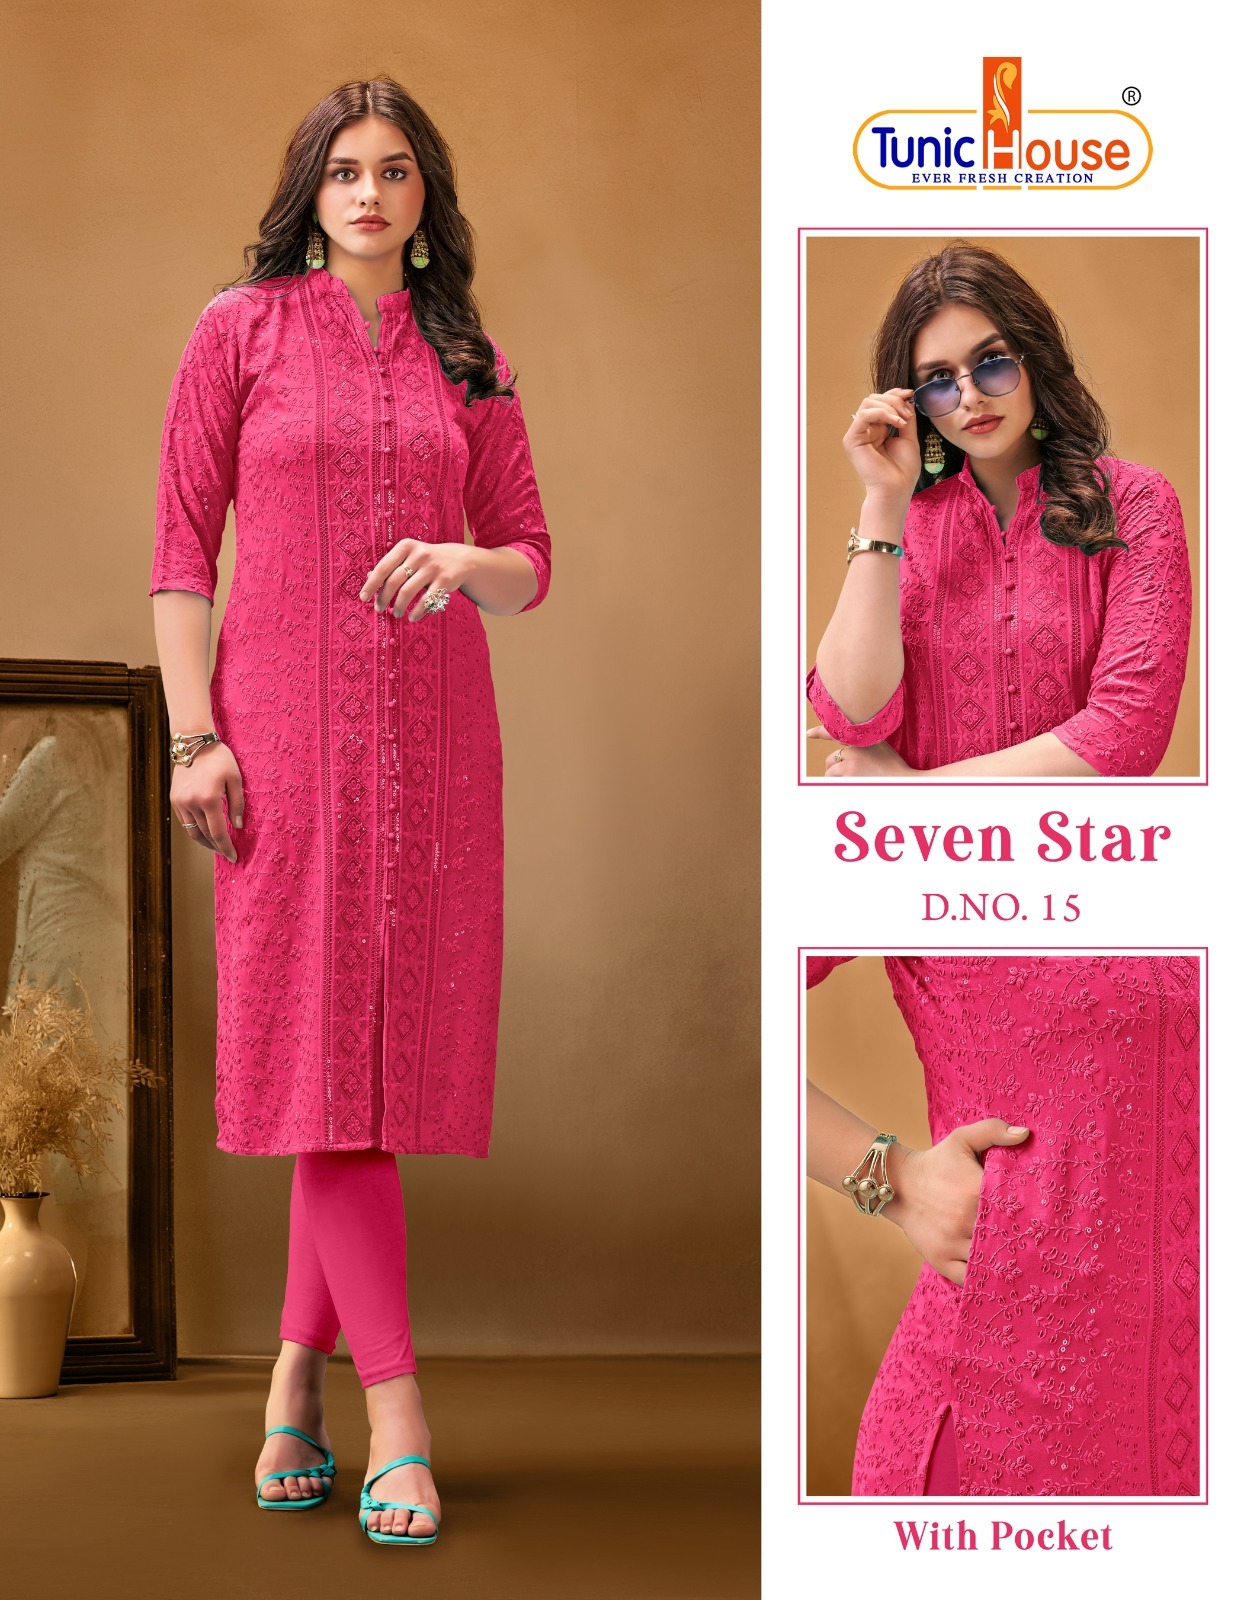 Tunic Houes 7 Star collection 10